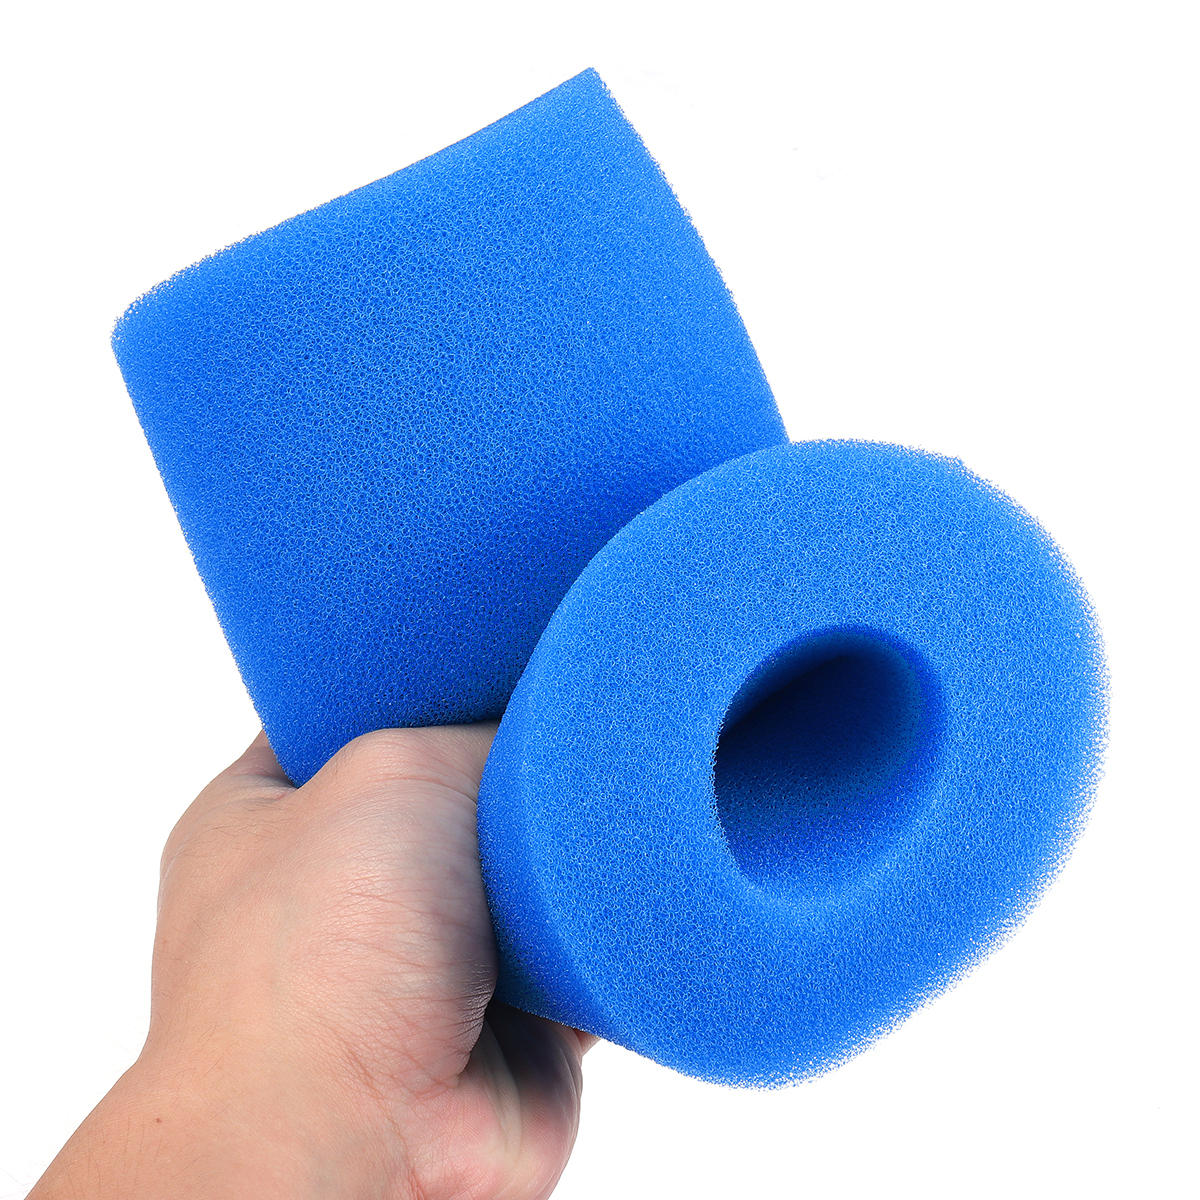 Swimming Pool Filter 3 Sizes Intex Pool Filter Reusable//Washable Swimming Pool Filter Sponge Cartridge Foam Cleaning Equipment